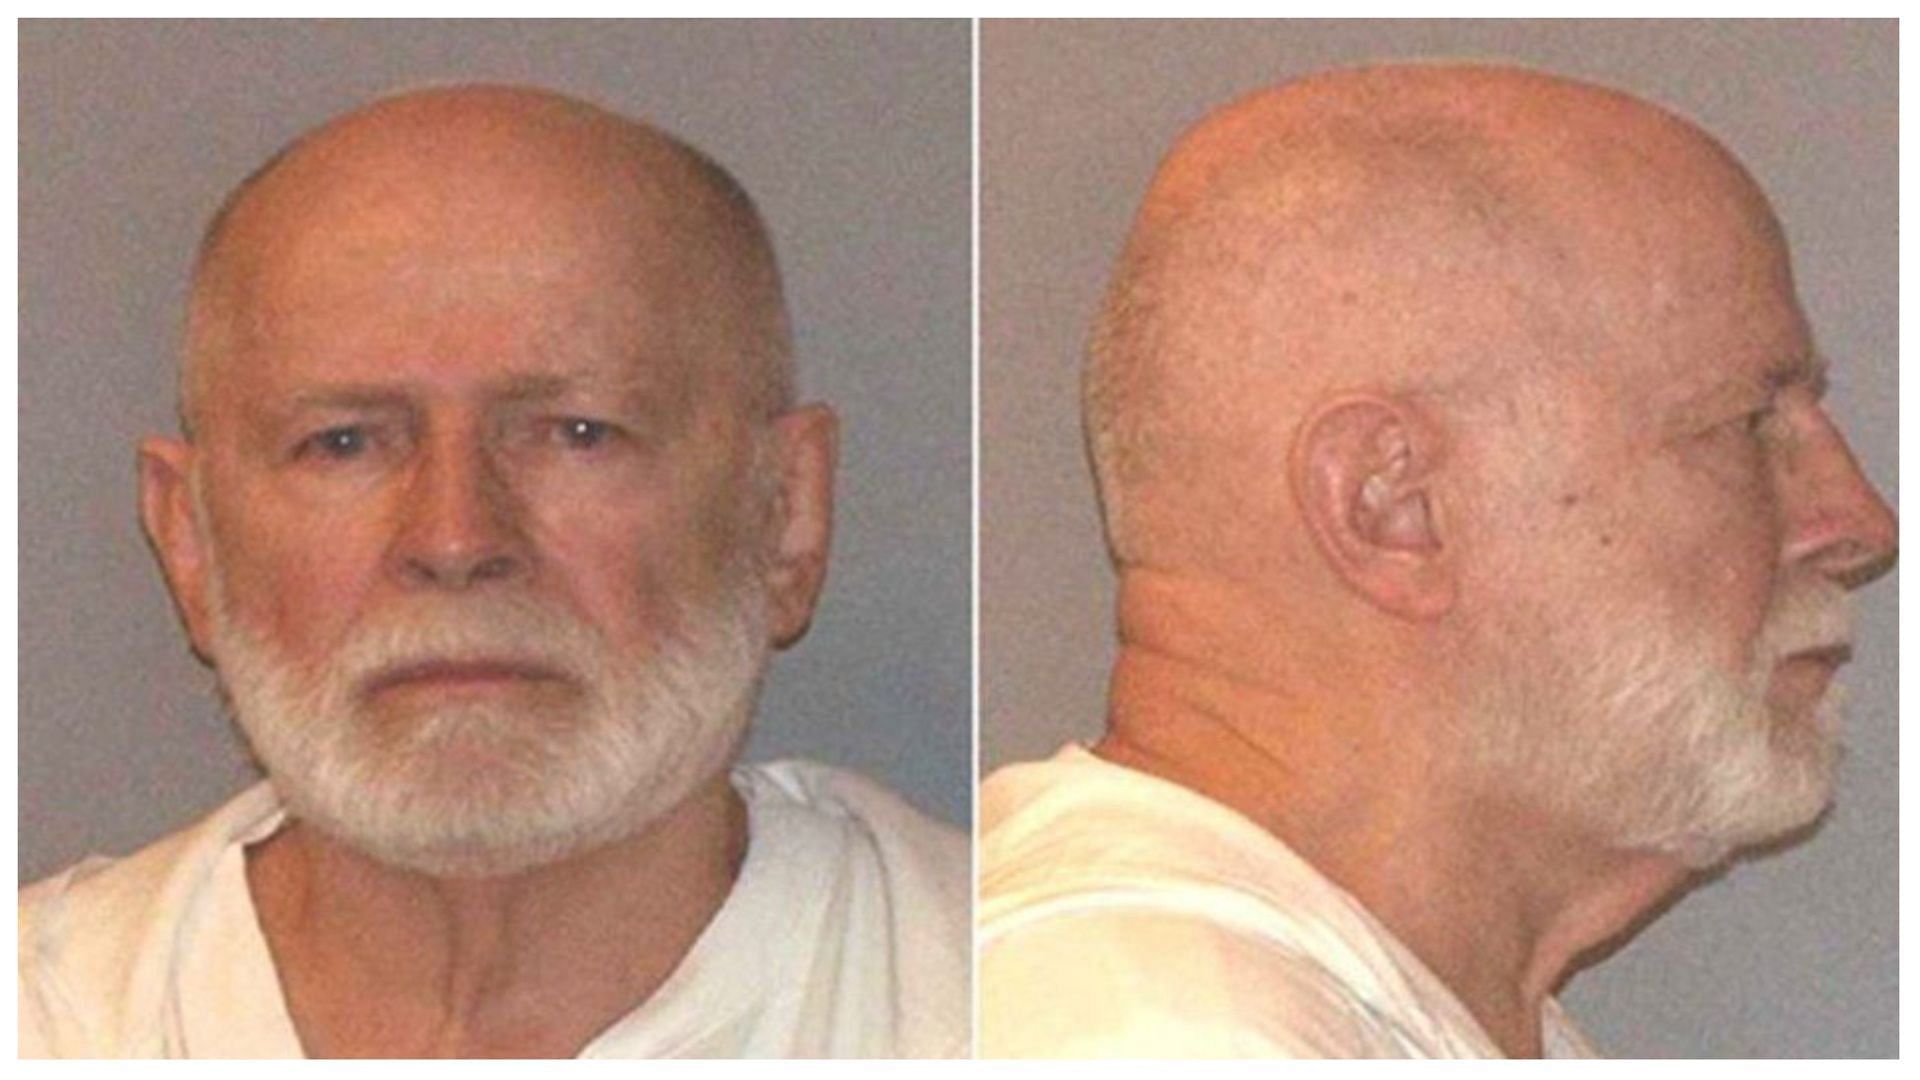 Bulger was formerly a major organised crime figure in Boston (Image via Getty)